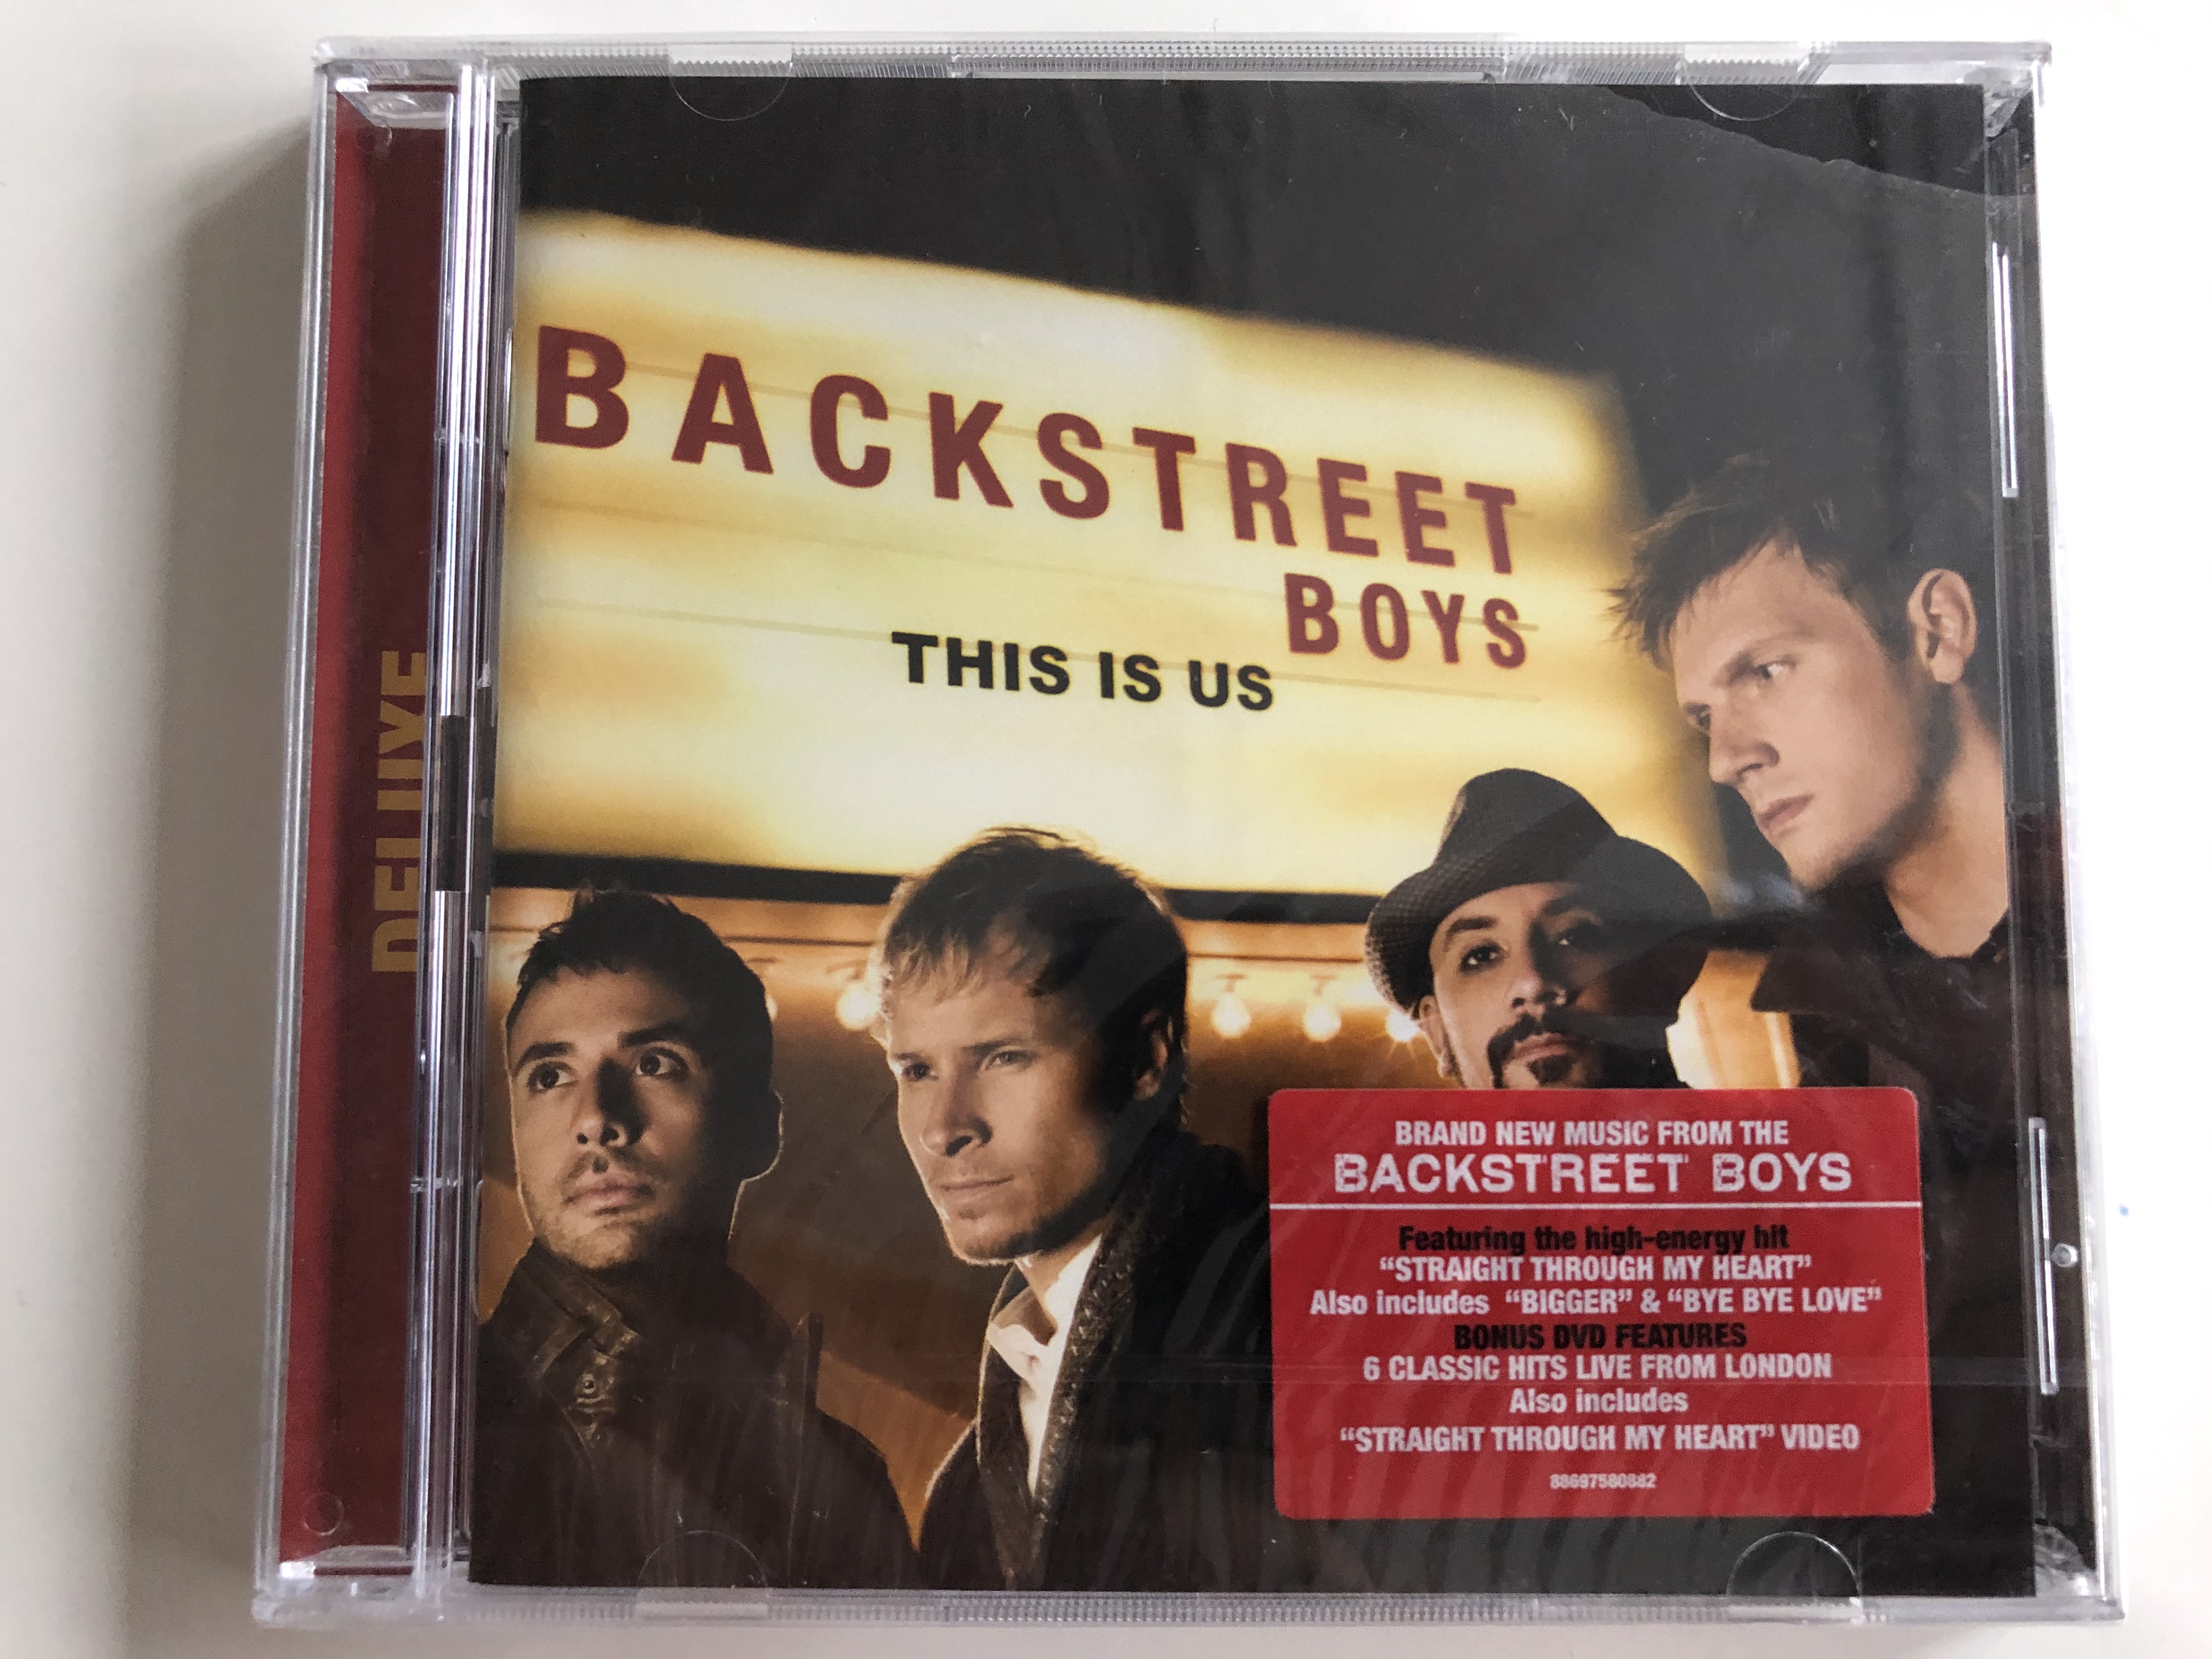 backstreet-boys-this-is-us-featuring-the-high-energy-hit-straight-through-my-heart-also-includes-bigger-bye-bye-love-bonus-dvd-features-6-classic-hits-live-from-london-son-1-.jpg